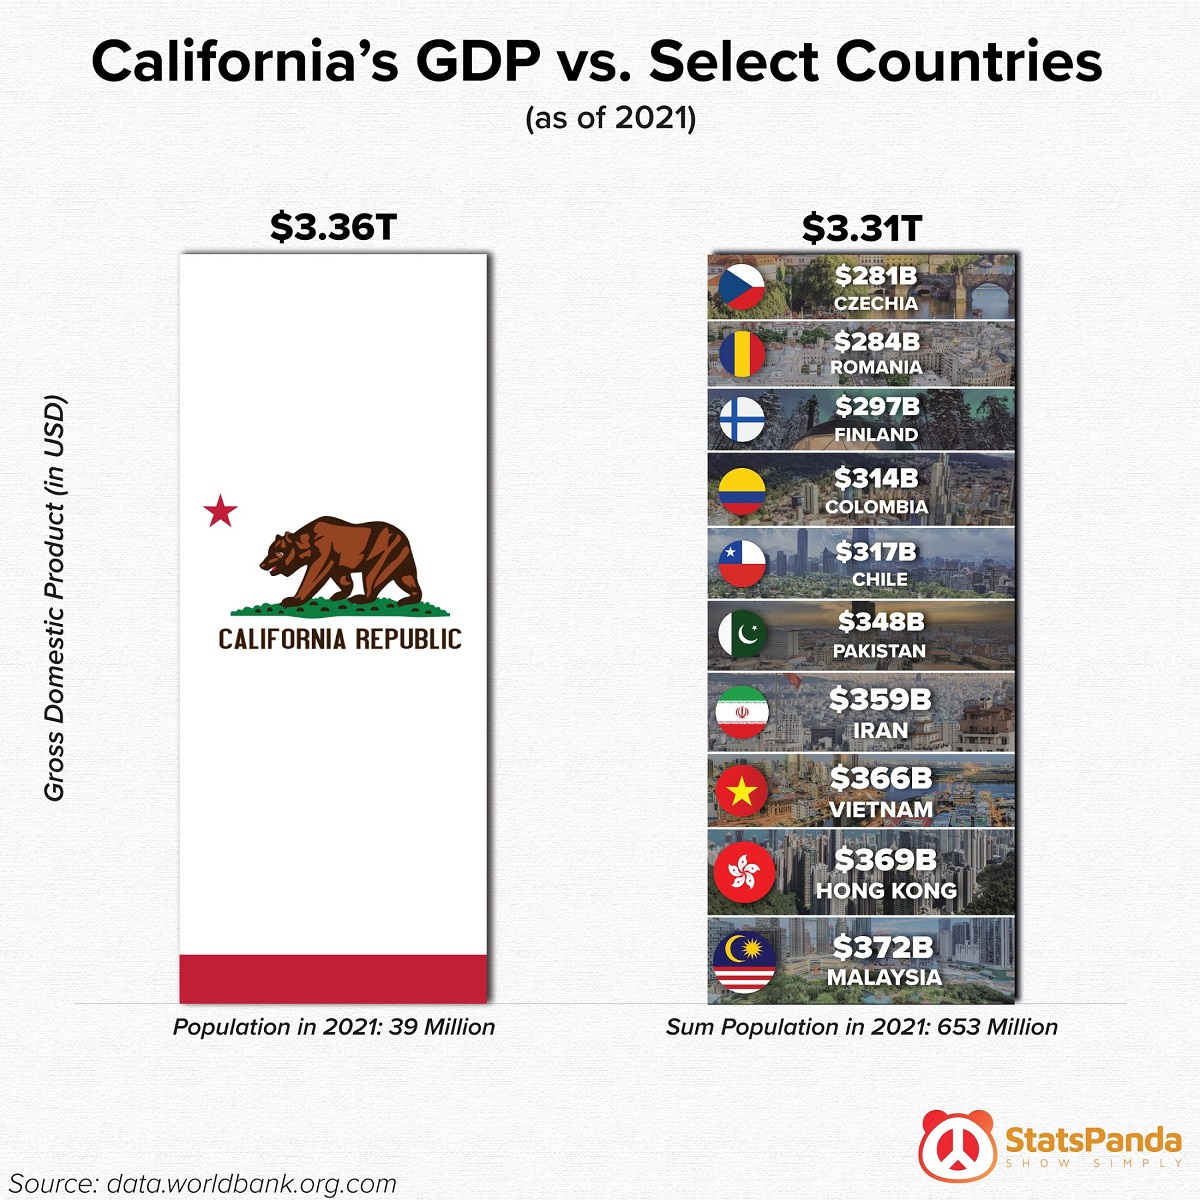 How California's GDP exceeds ten select countries